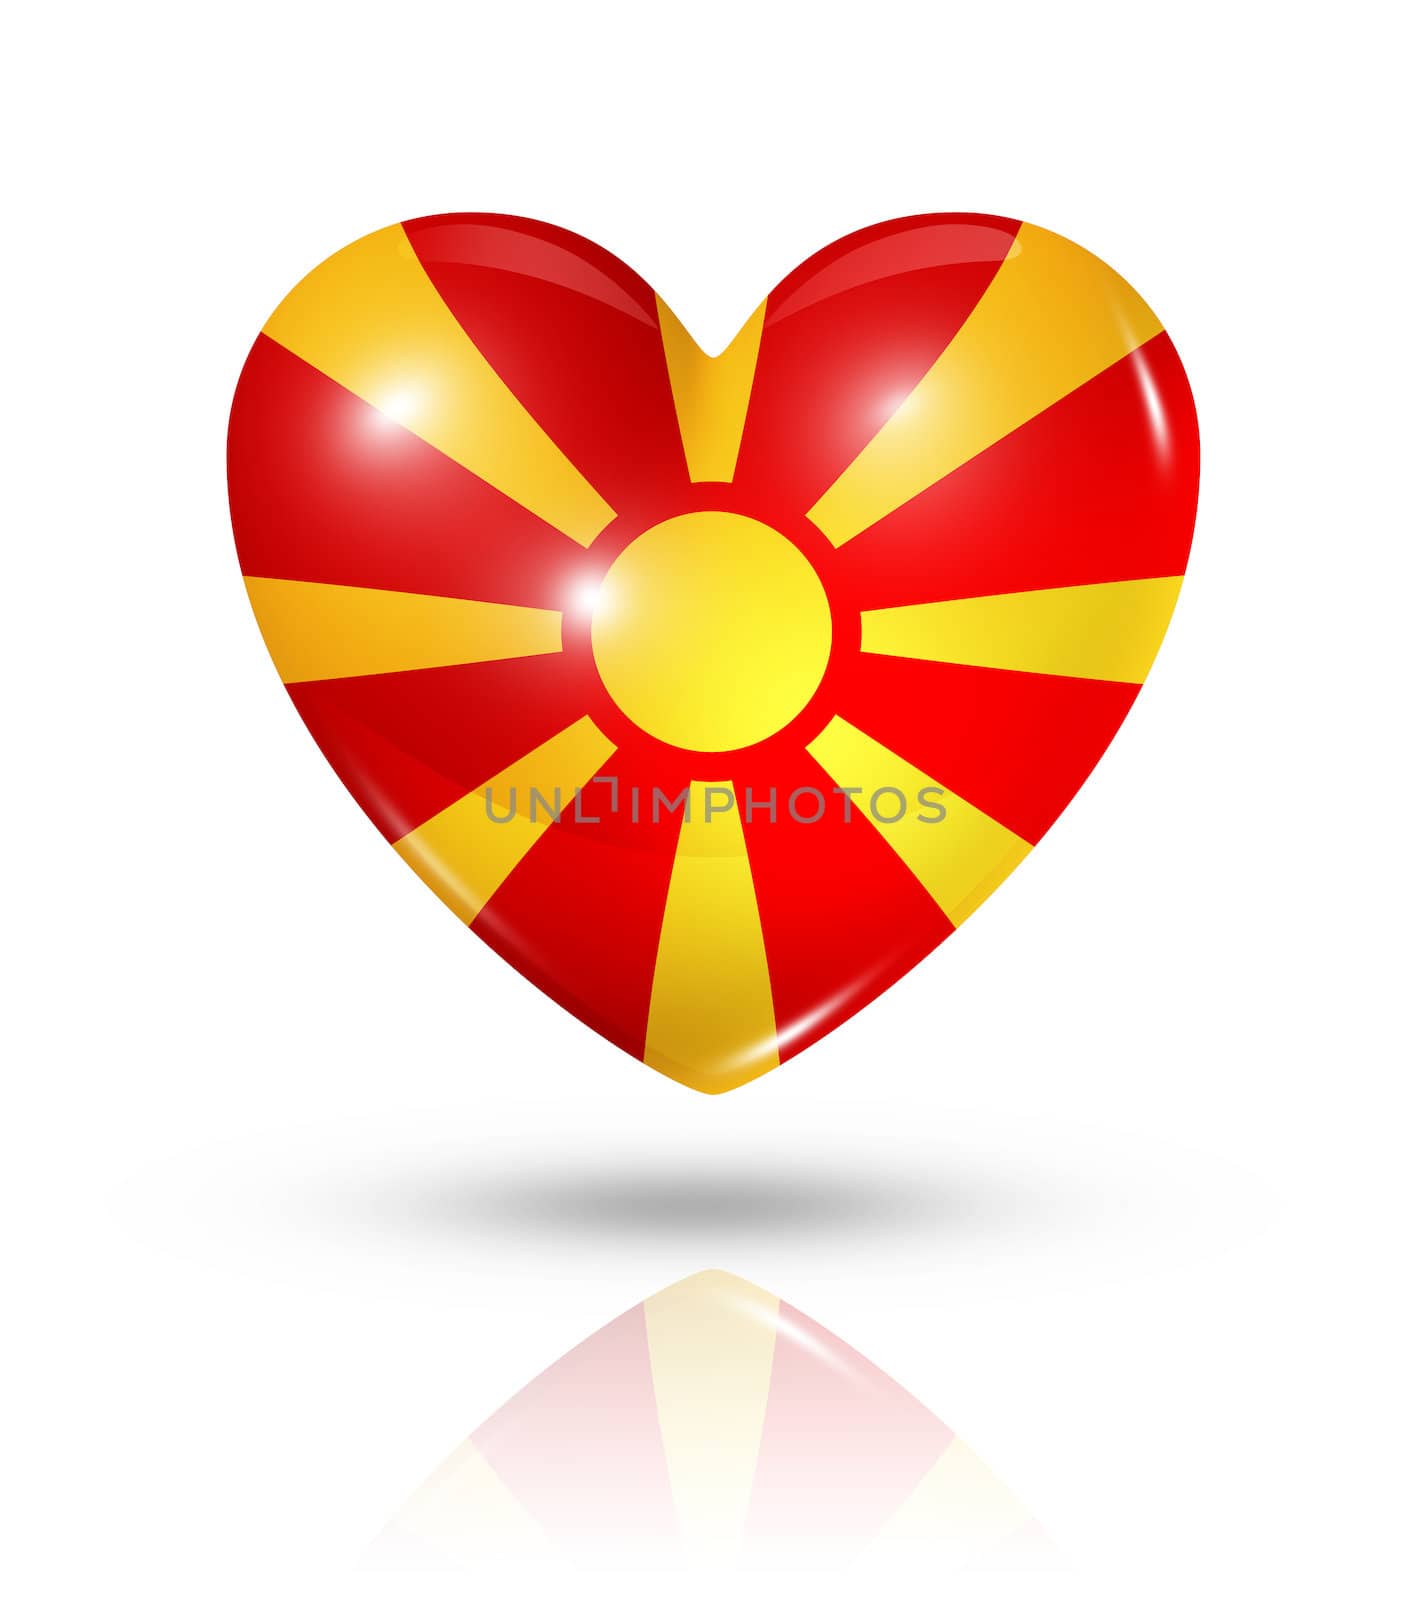 Love Macedonia, heart flag icon by daboost